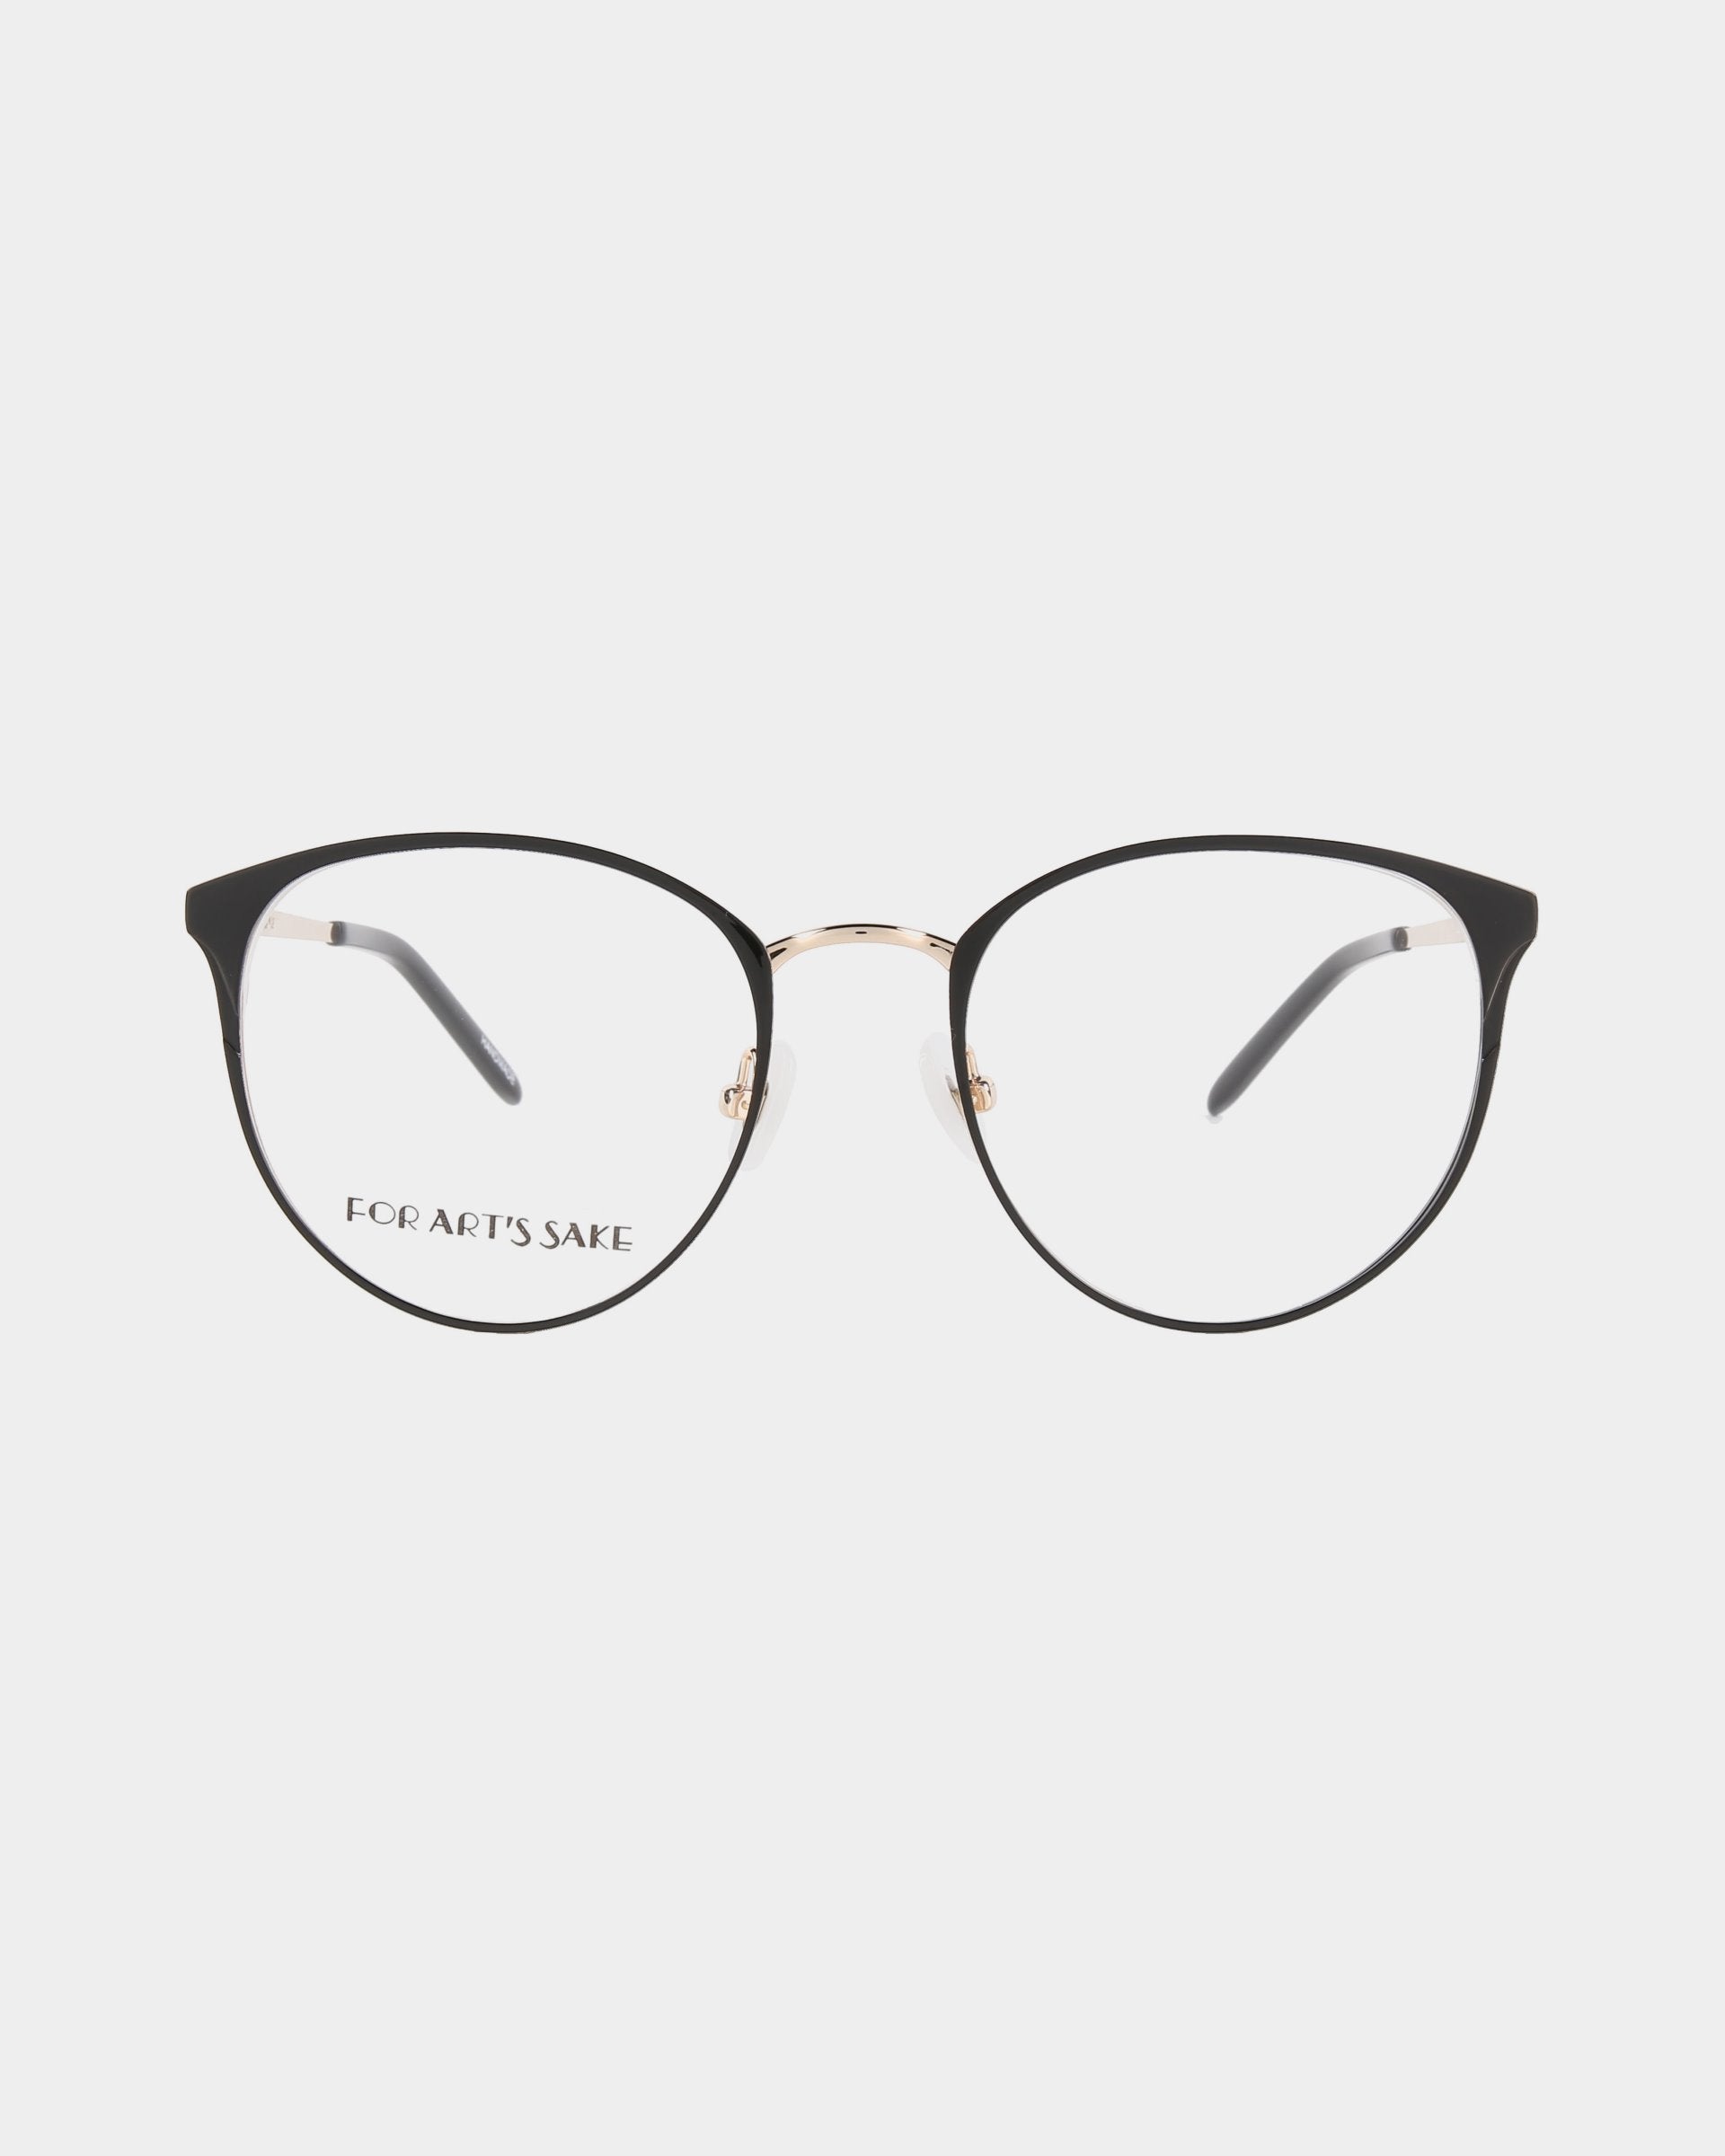 A pair of thin-rimmed, round eyeglasses with black and gold frames is displayed against a white background. The left lens includes the text "For Art's Sake." The design is simple and elegant, featuring blue light filter lenses to protect your eyes from digital strain. These eyeglasses are the Olivia by For Art's Sake®.